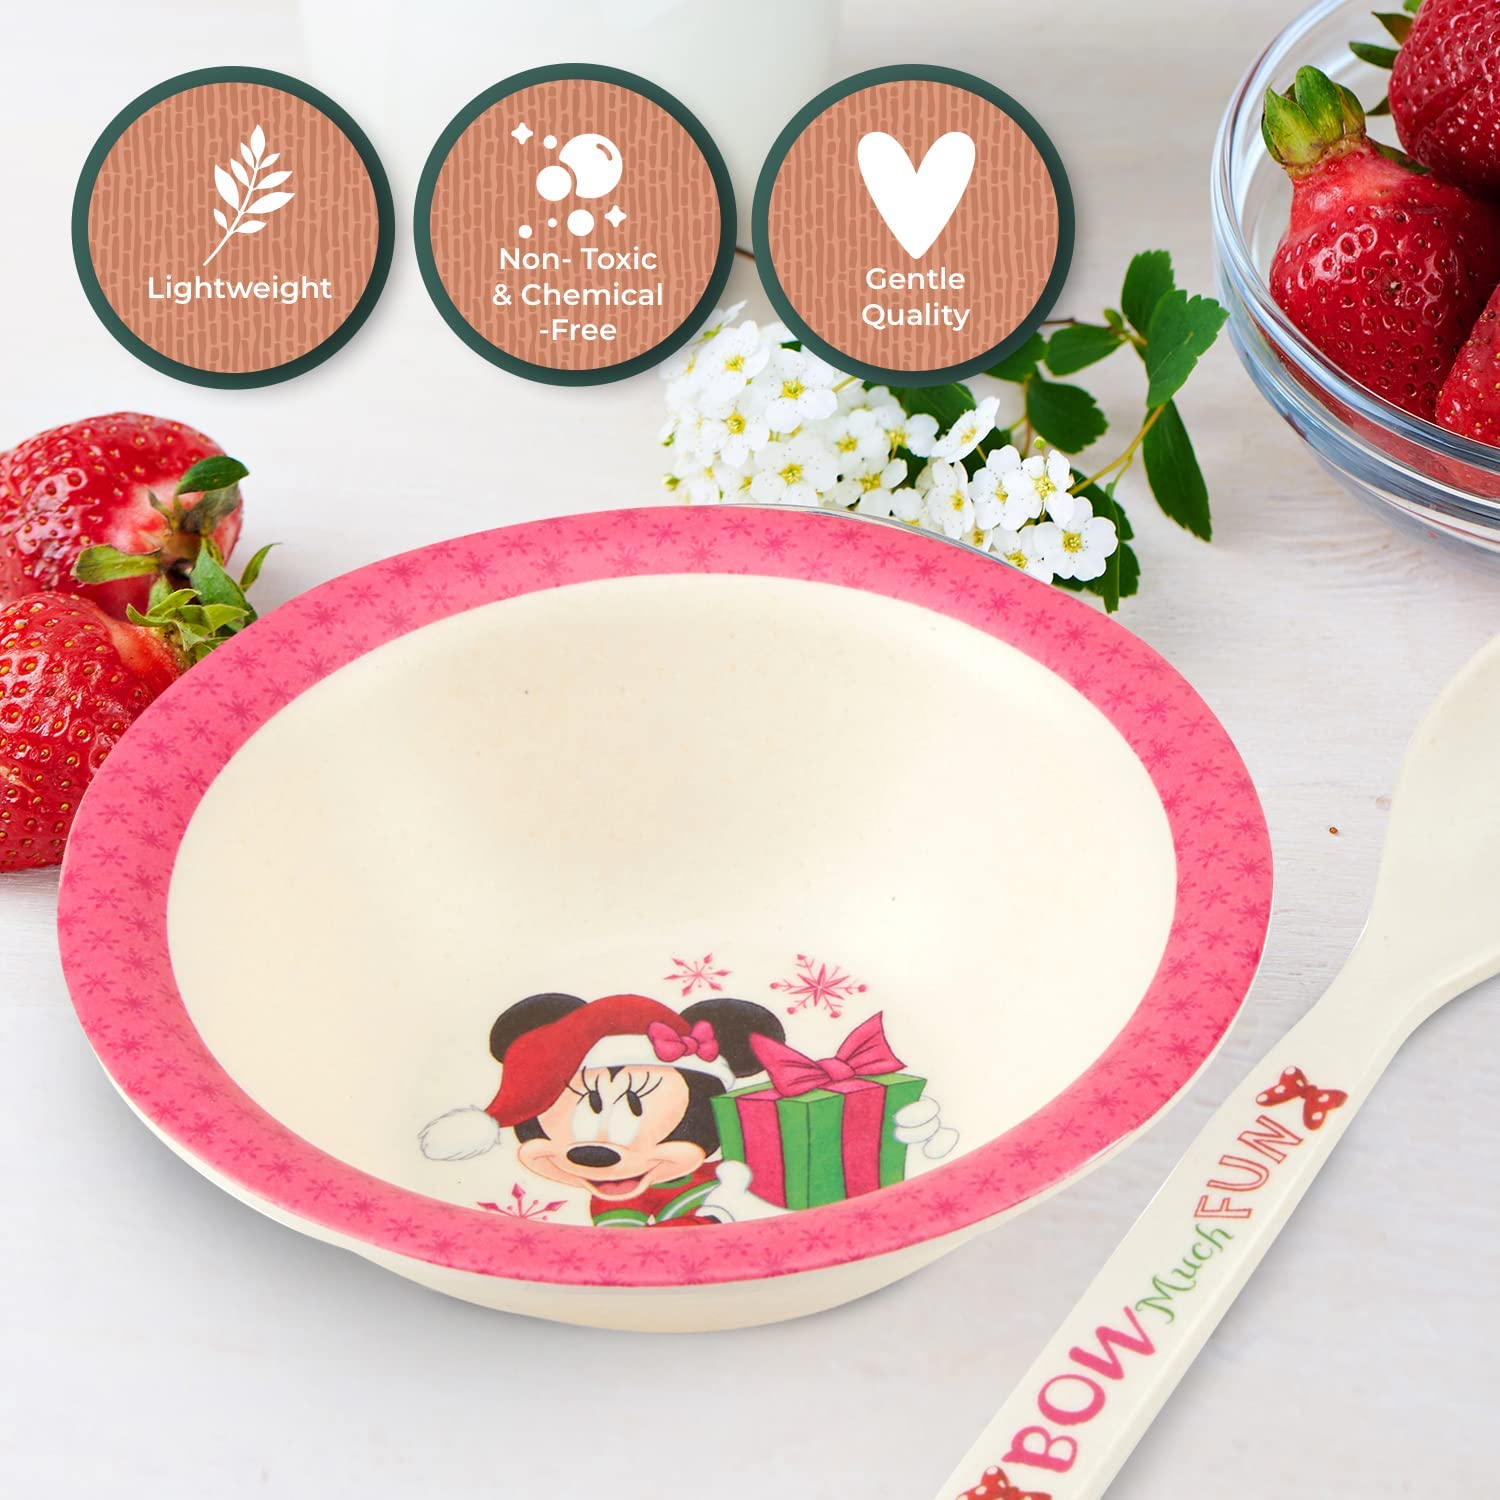 Bamboo Kids’ 5-Piece Dinnerware Set By Zrike Brands-Tableware Set With Dinner Plate, Bowl, Cup, Fork & Spoon- BPA-Free Disney Toddlers Feeding Set- Great Holiday Gift MINNIE JOY 5PC BAMBOO SET